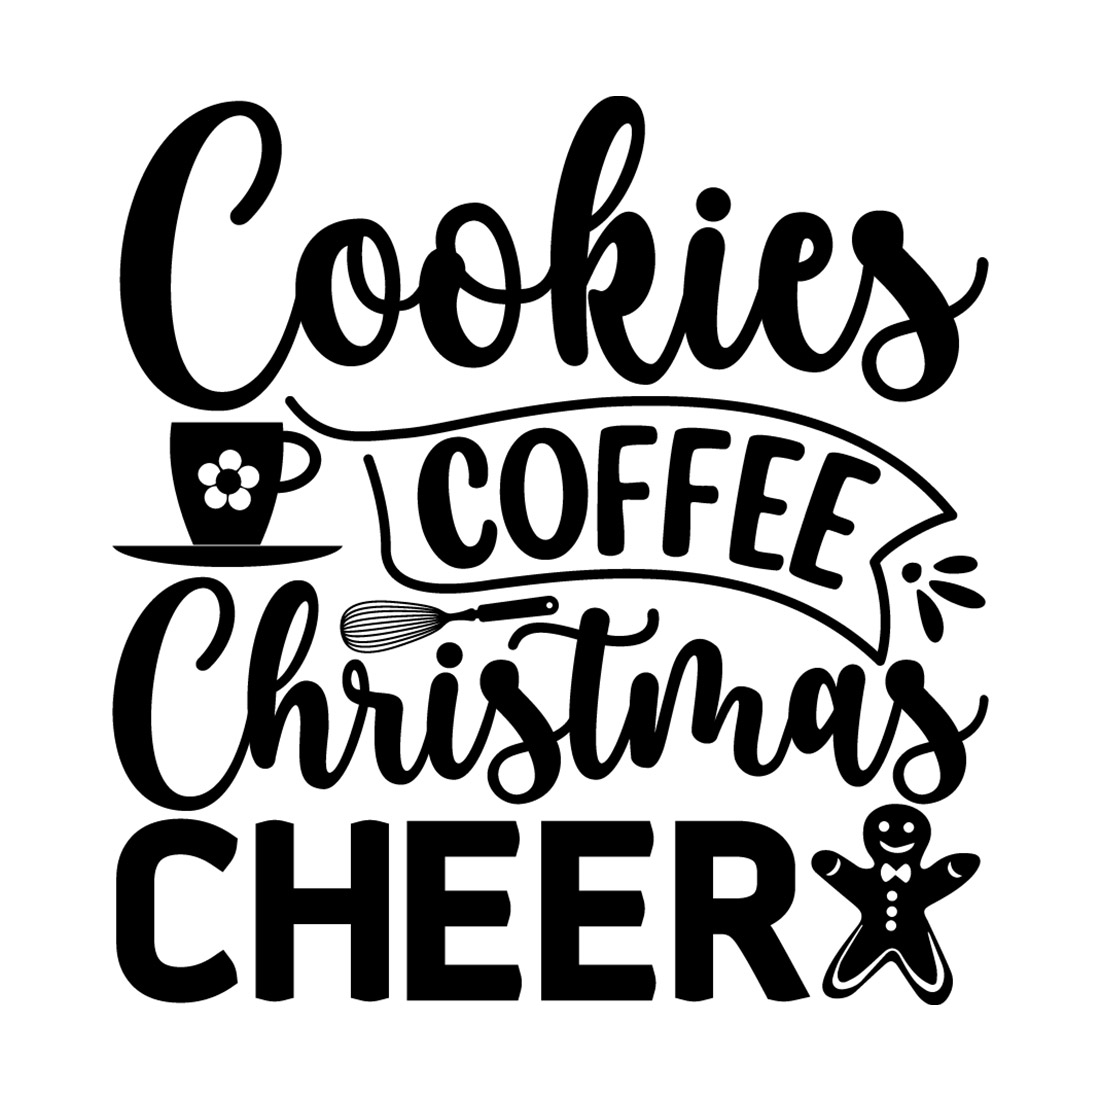 cooking - Cookies coffee Christmas cheer preview image.